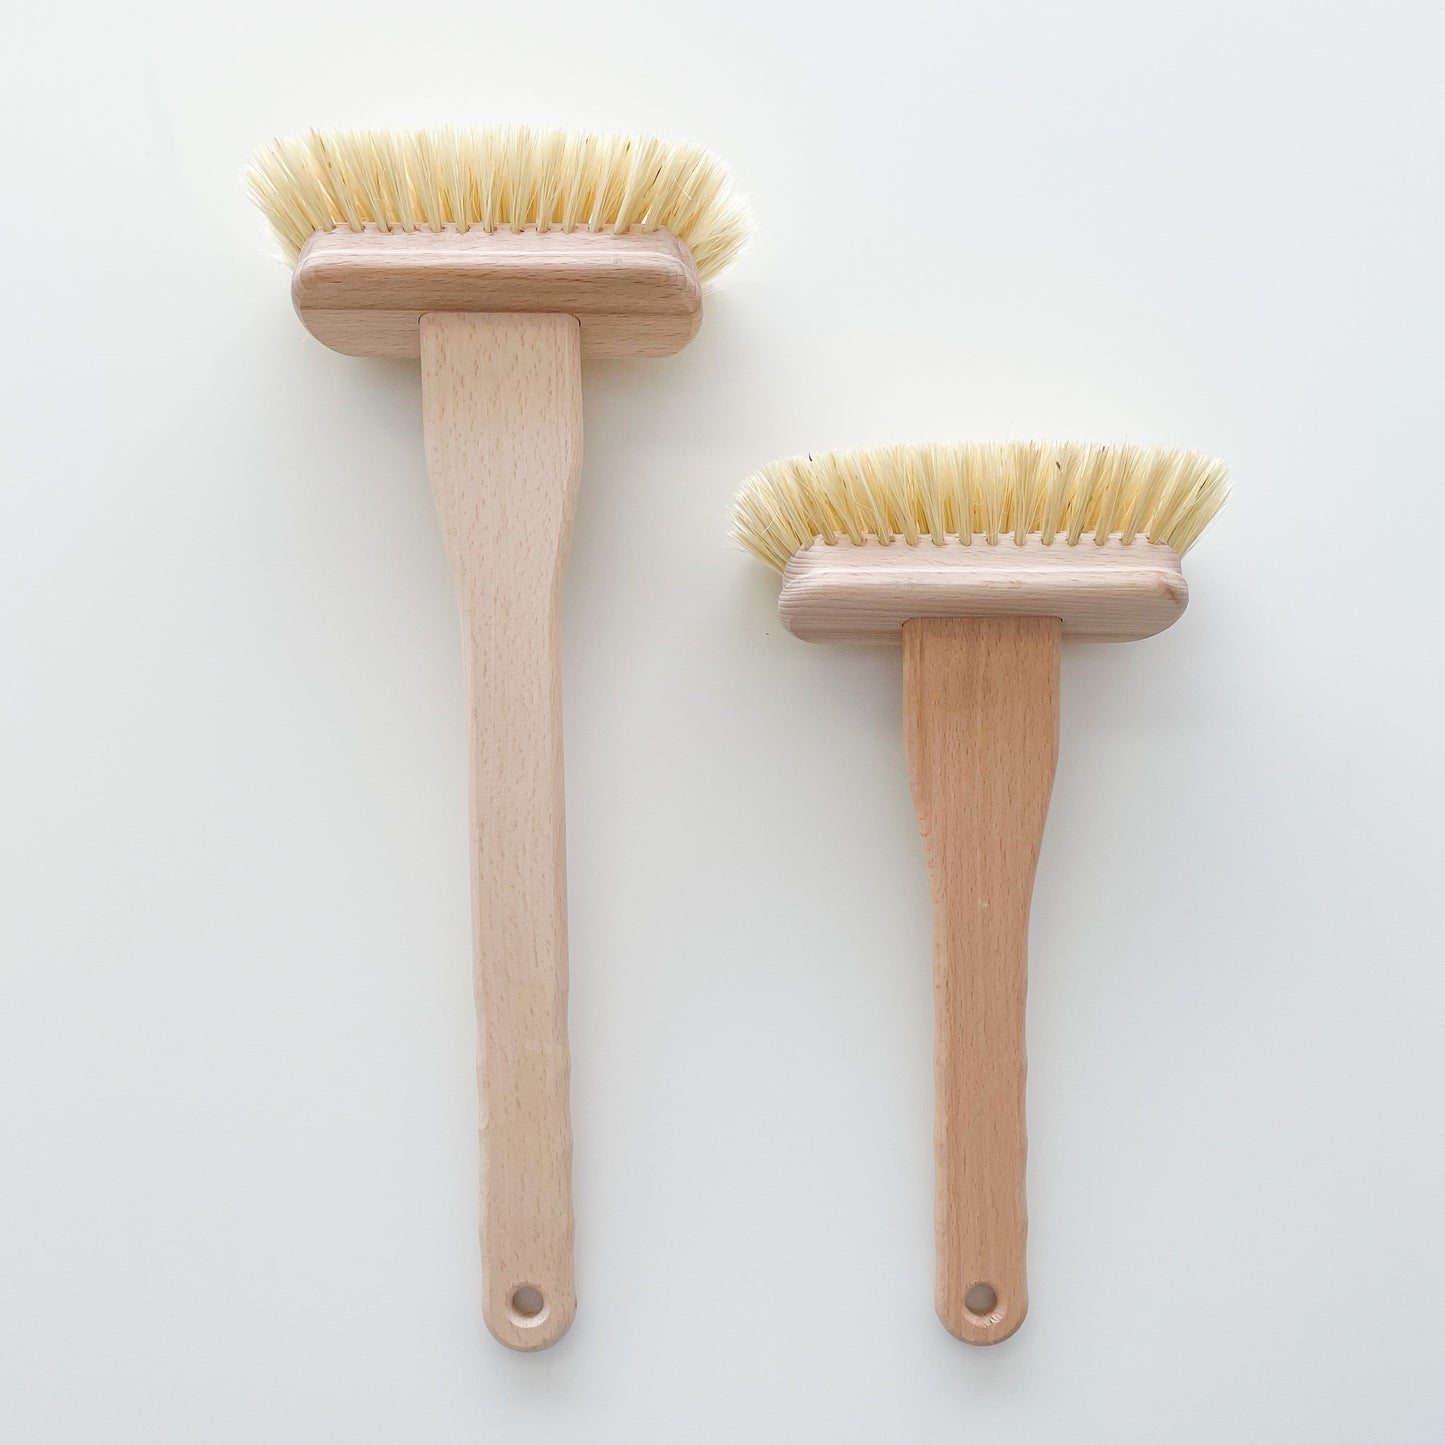 two bath cleaning brushes, one short, one long